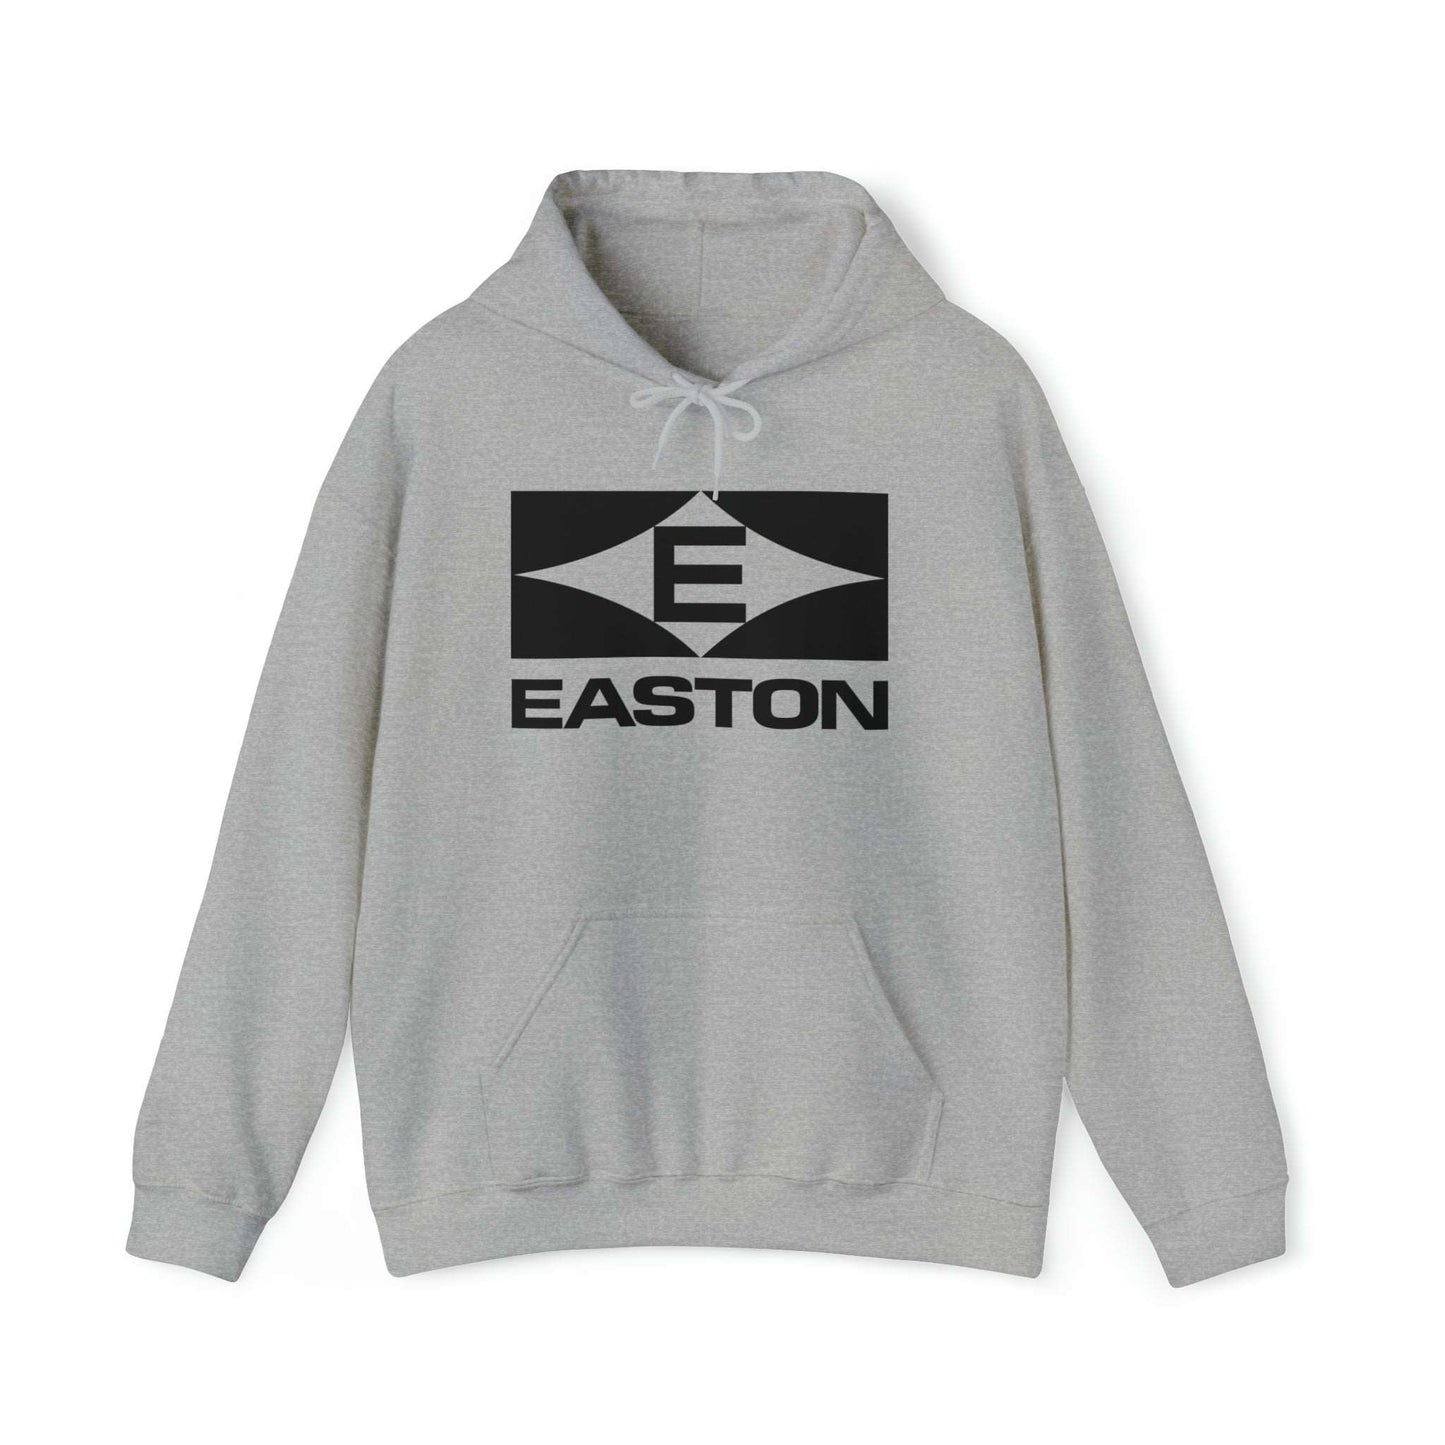 Retro Easton Hoodie - Limited Time